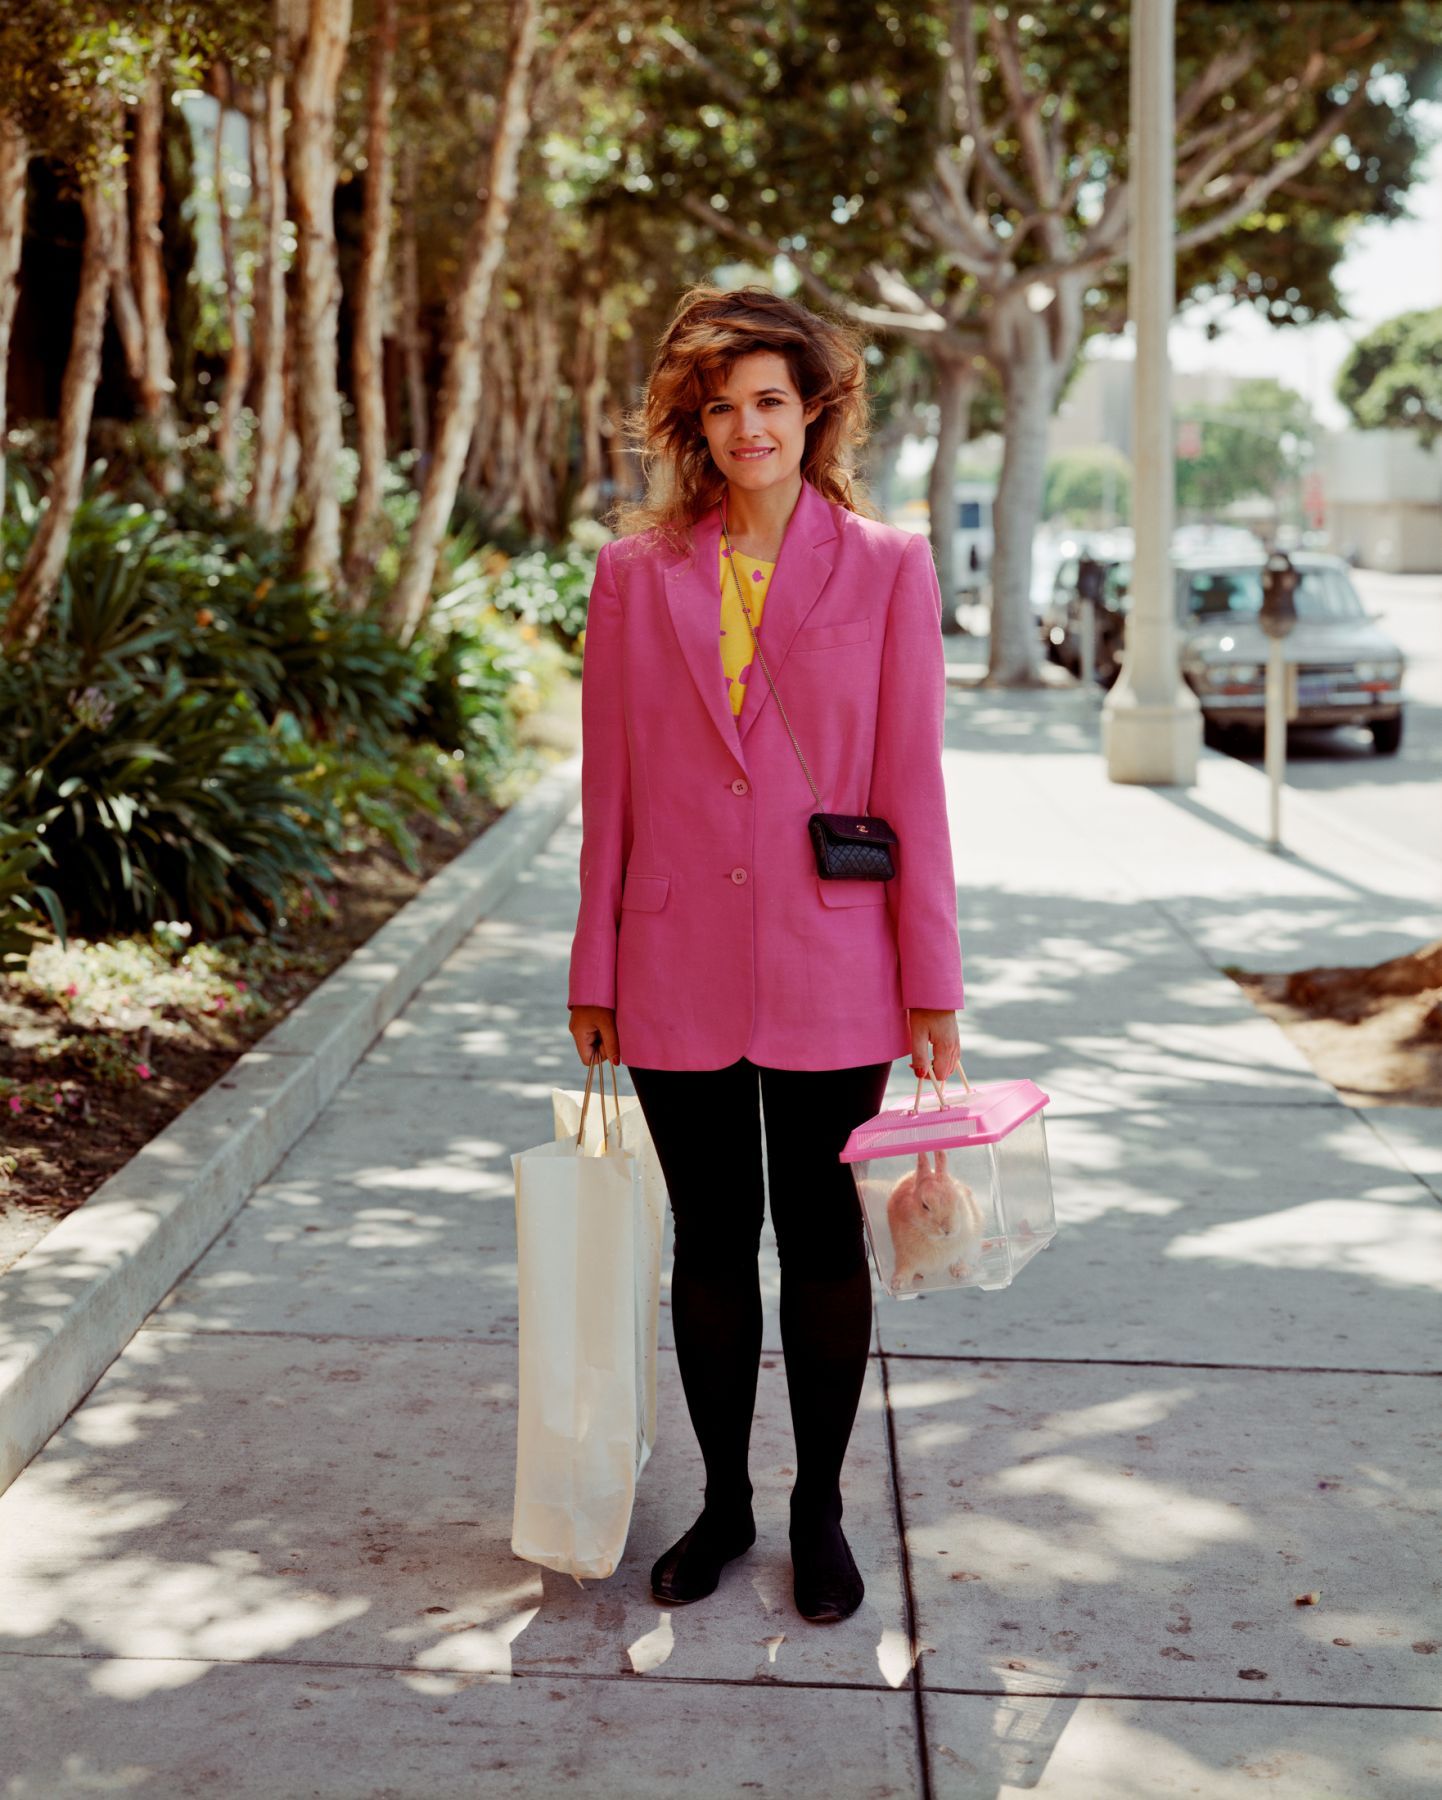 A Woman Out Shopping with Her Pet Rabbit, Santa Monica, California, August 1987